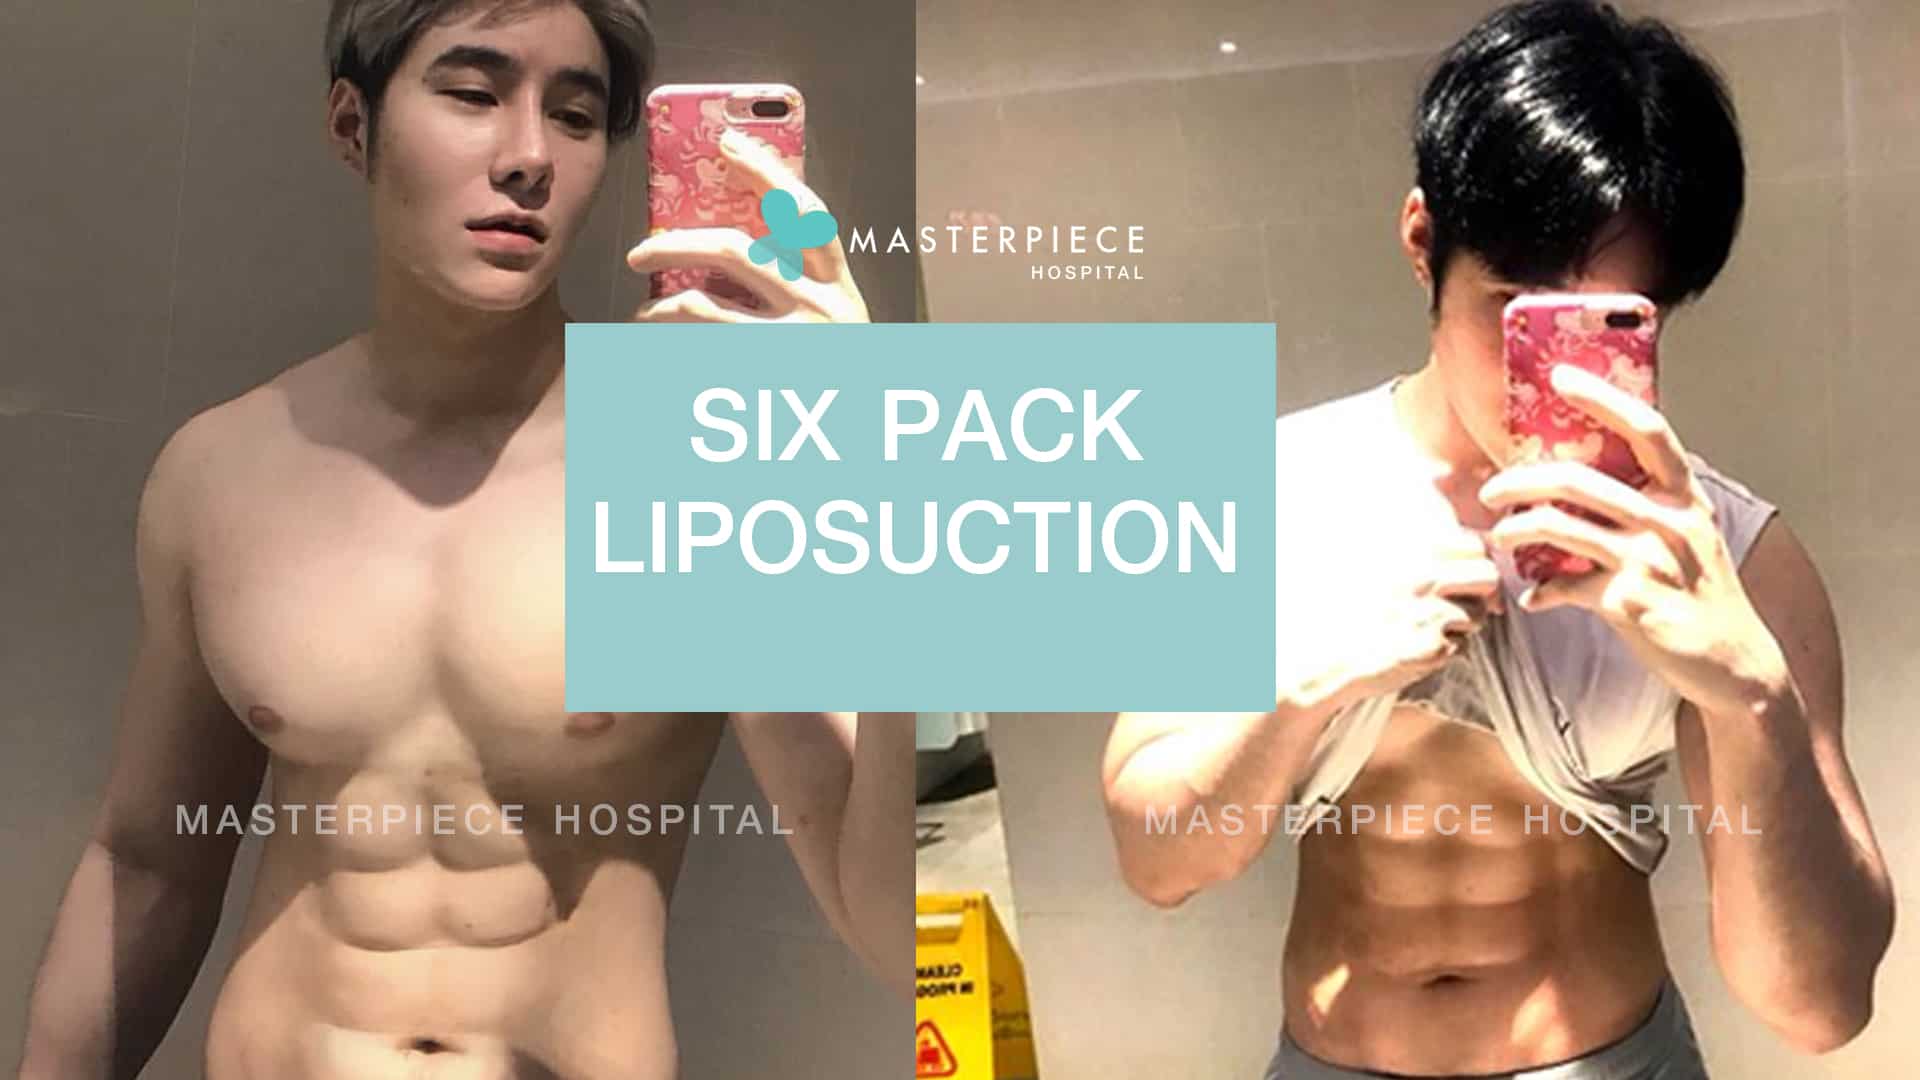 Six pack Liposuction review